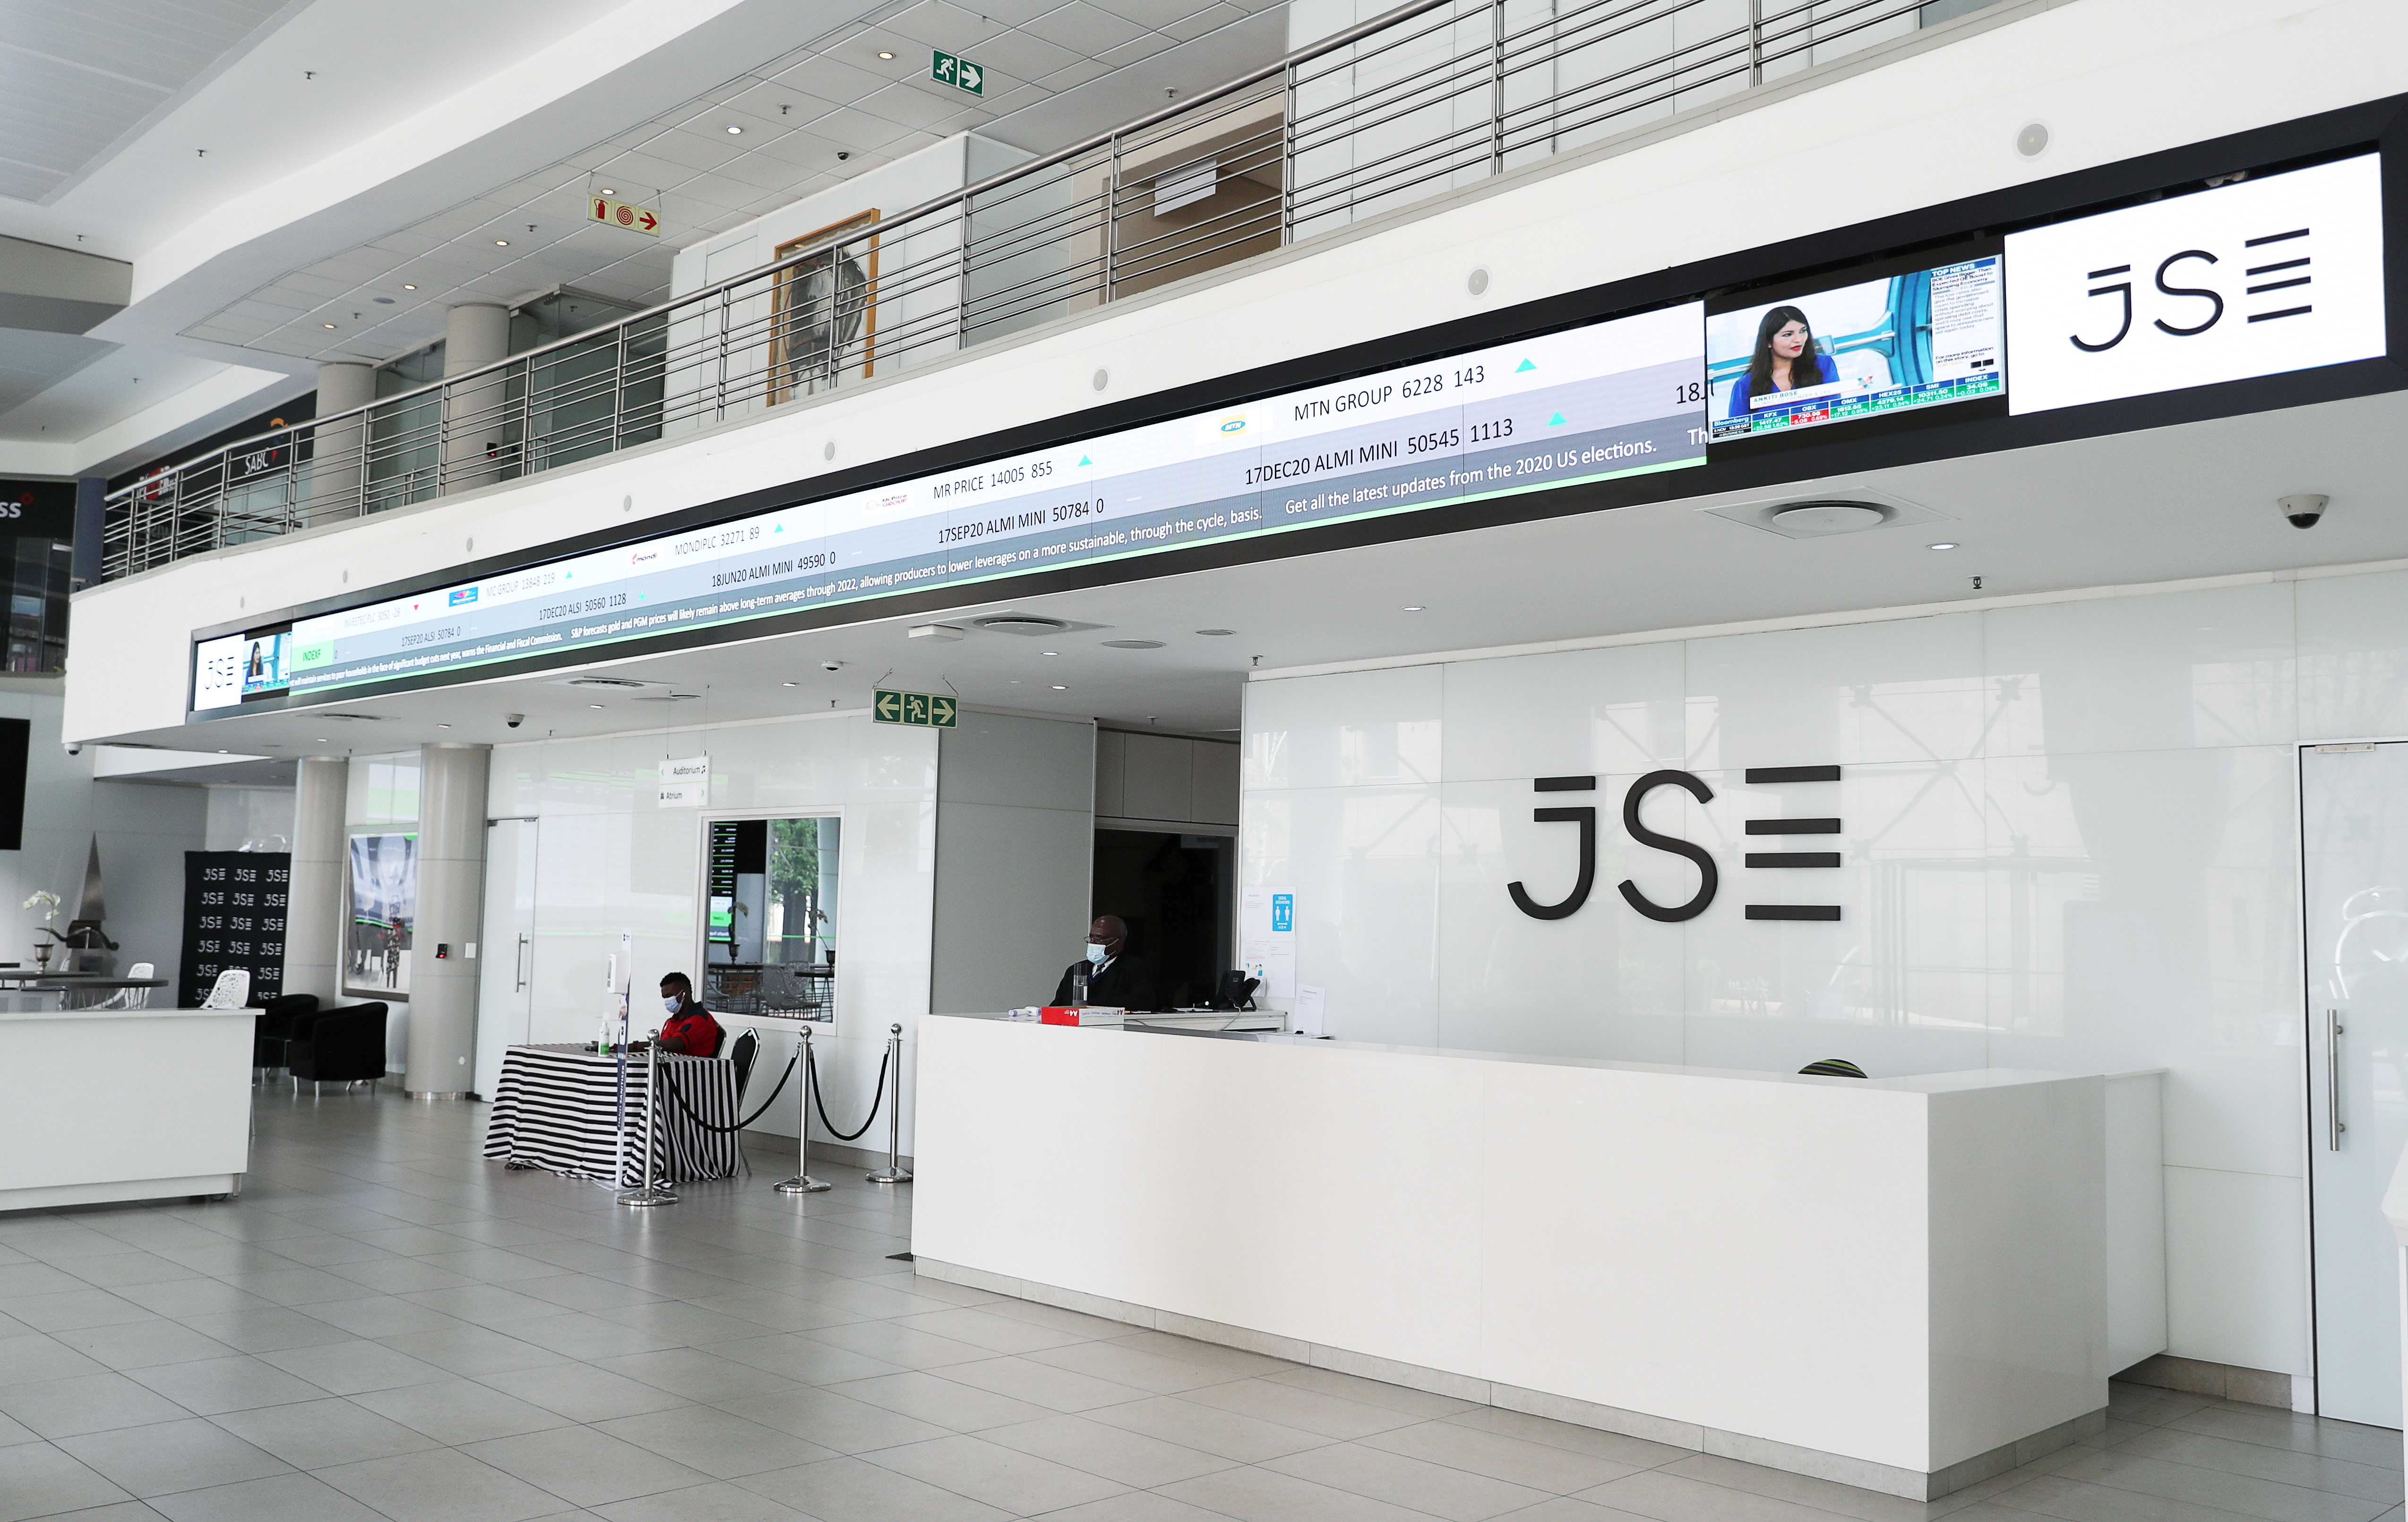 Workers wearing protective masks are seen at the reception with an electronic board displaying major indices at the Johannesburg Stock Exchange building in Sandton